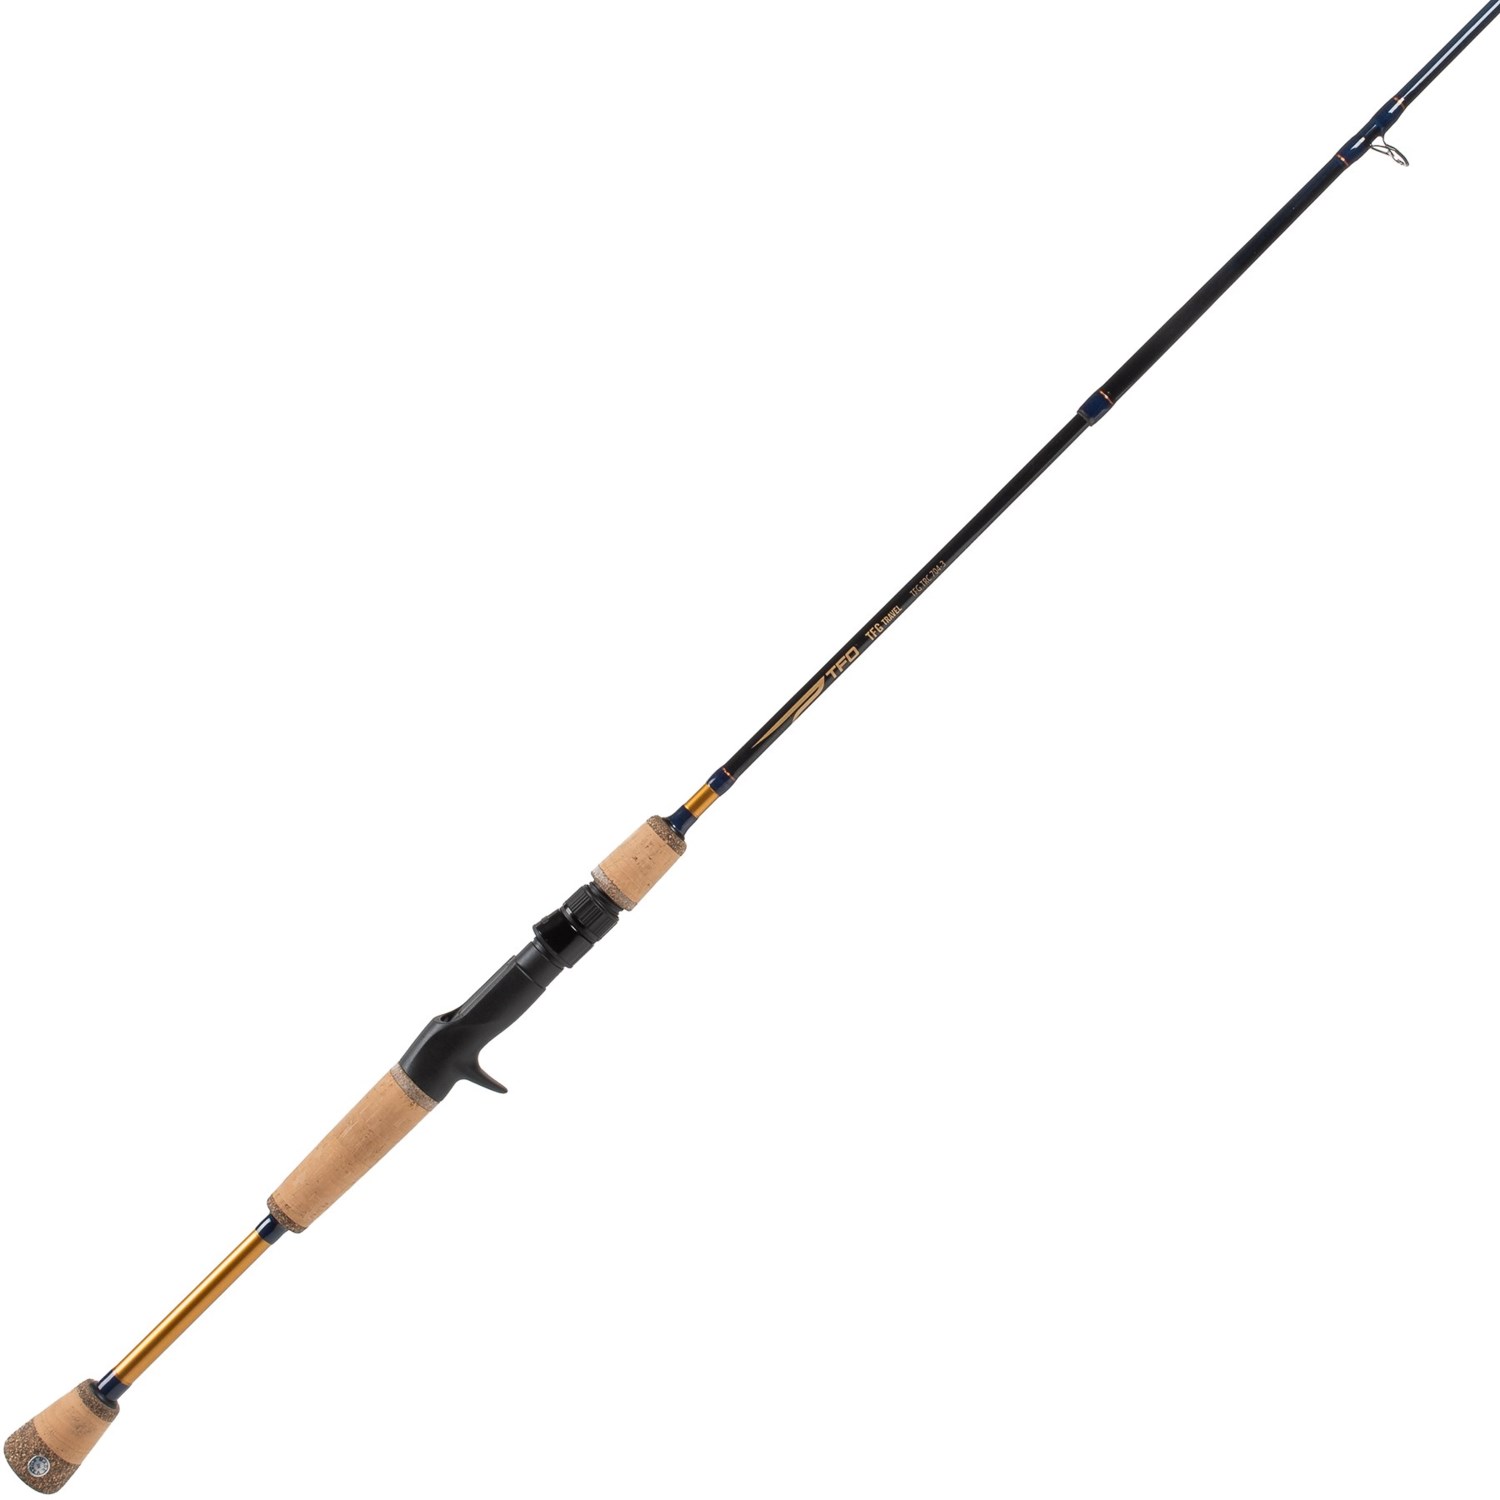 temple fork outfitters travel rod